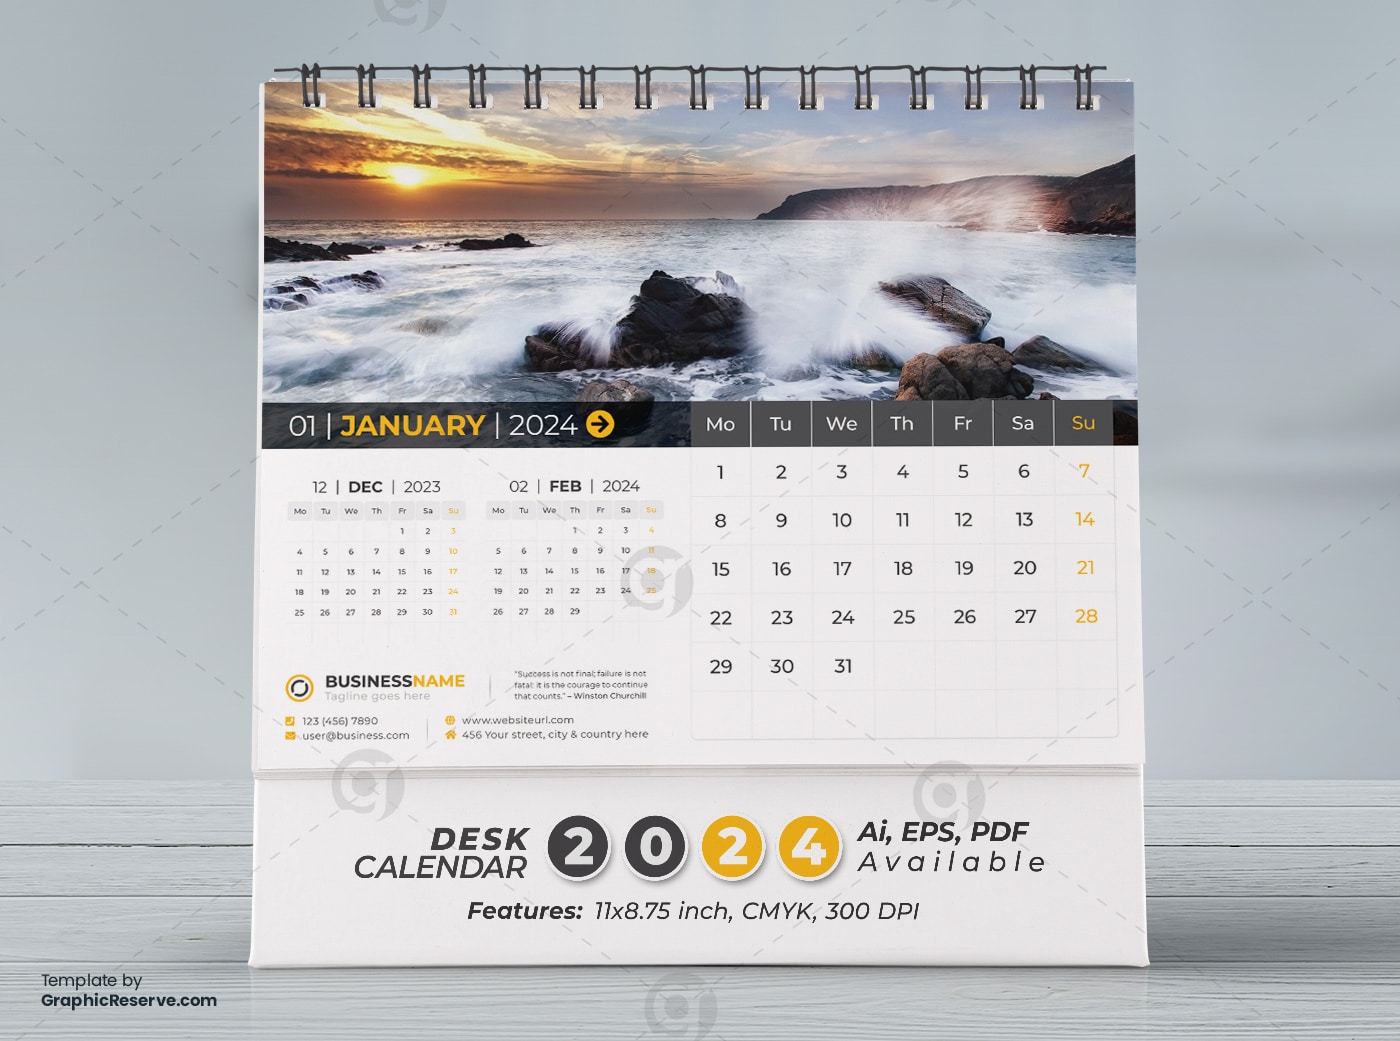 Desk Calendar 2024 Template By VisualGraphics On Graphic Reserve.1v 6 